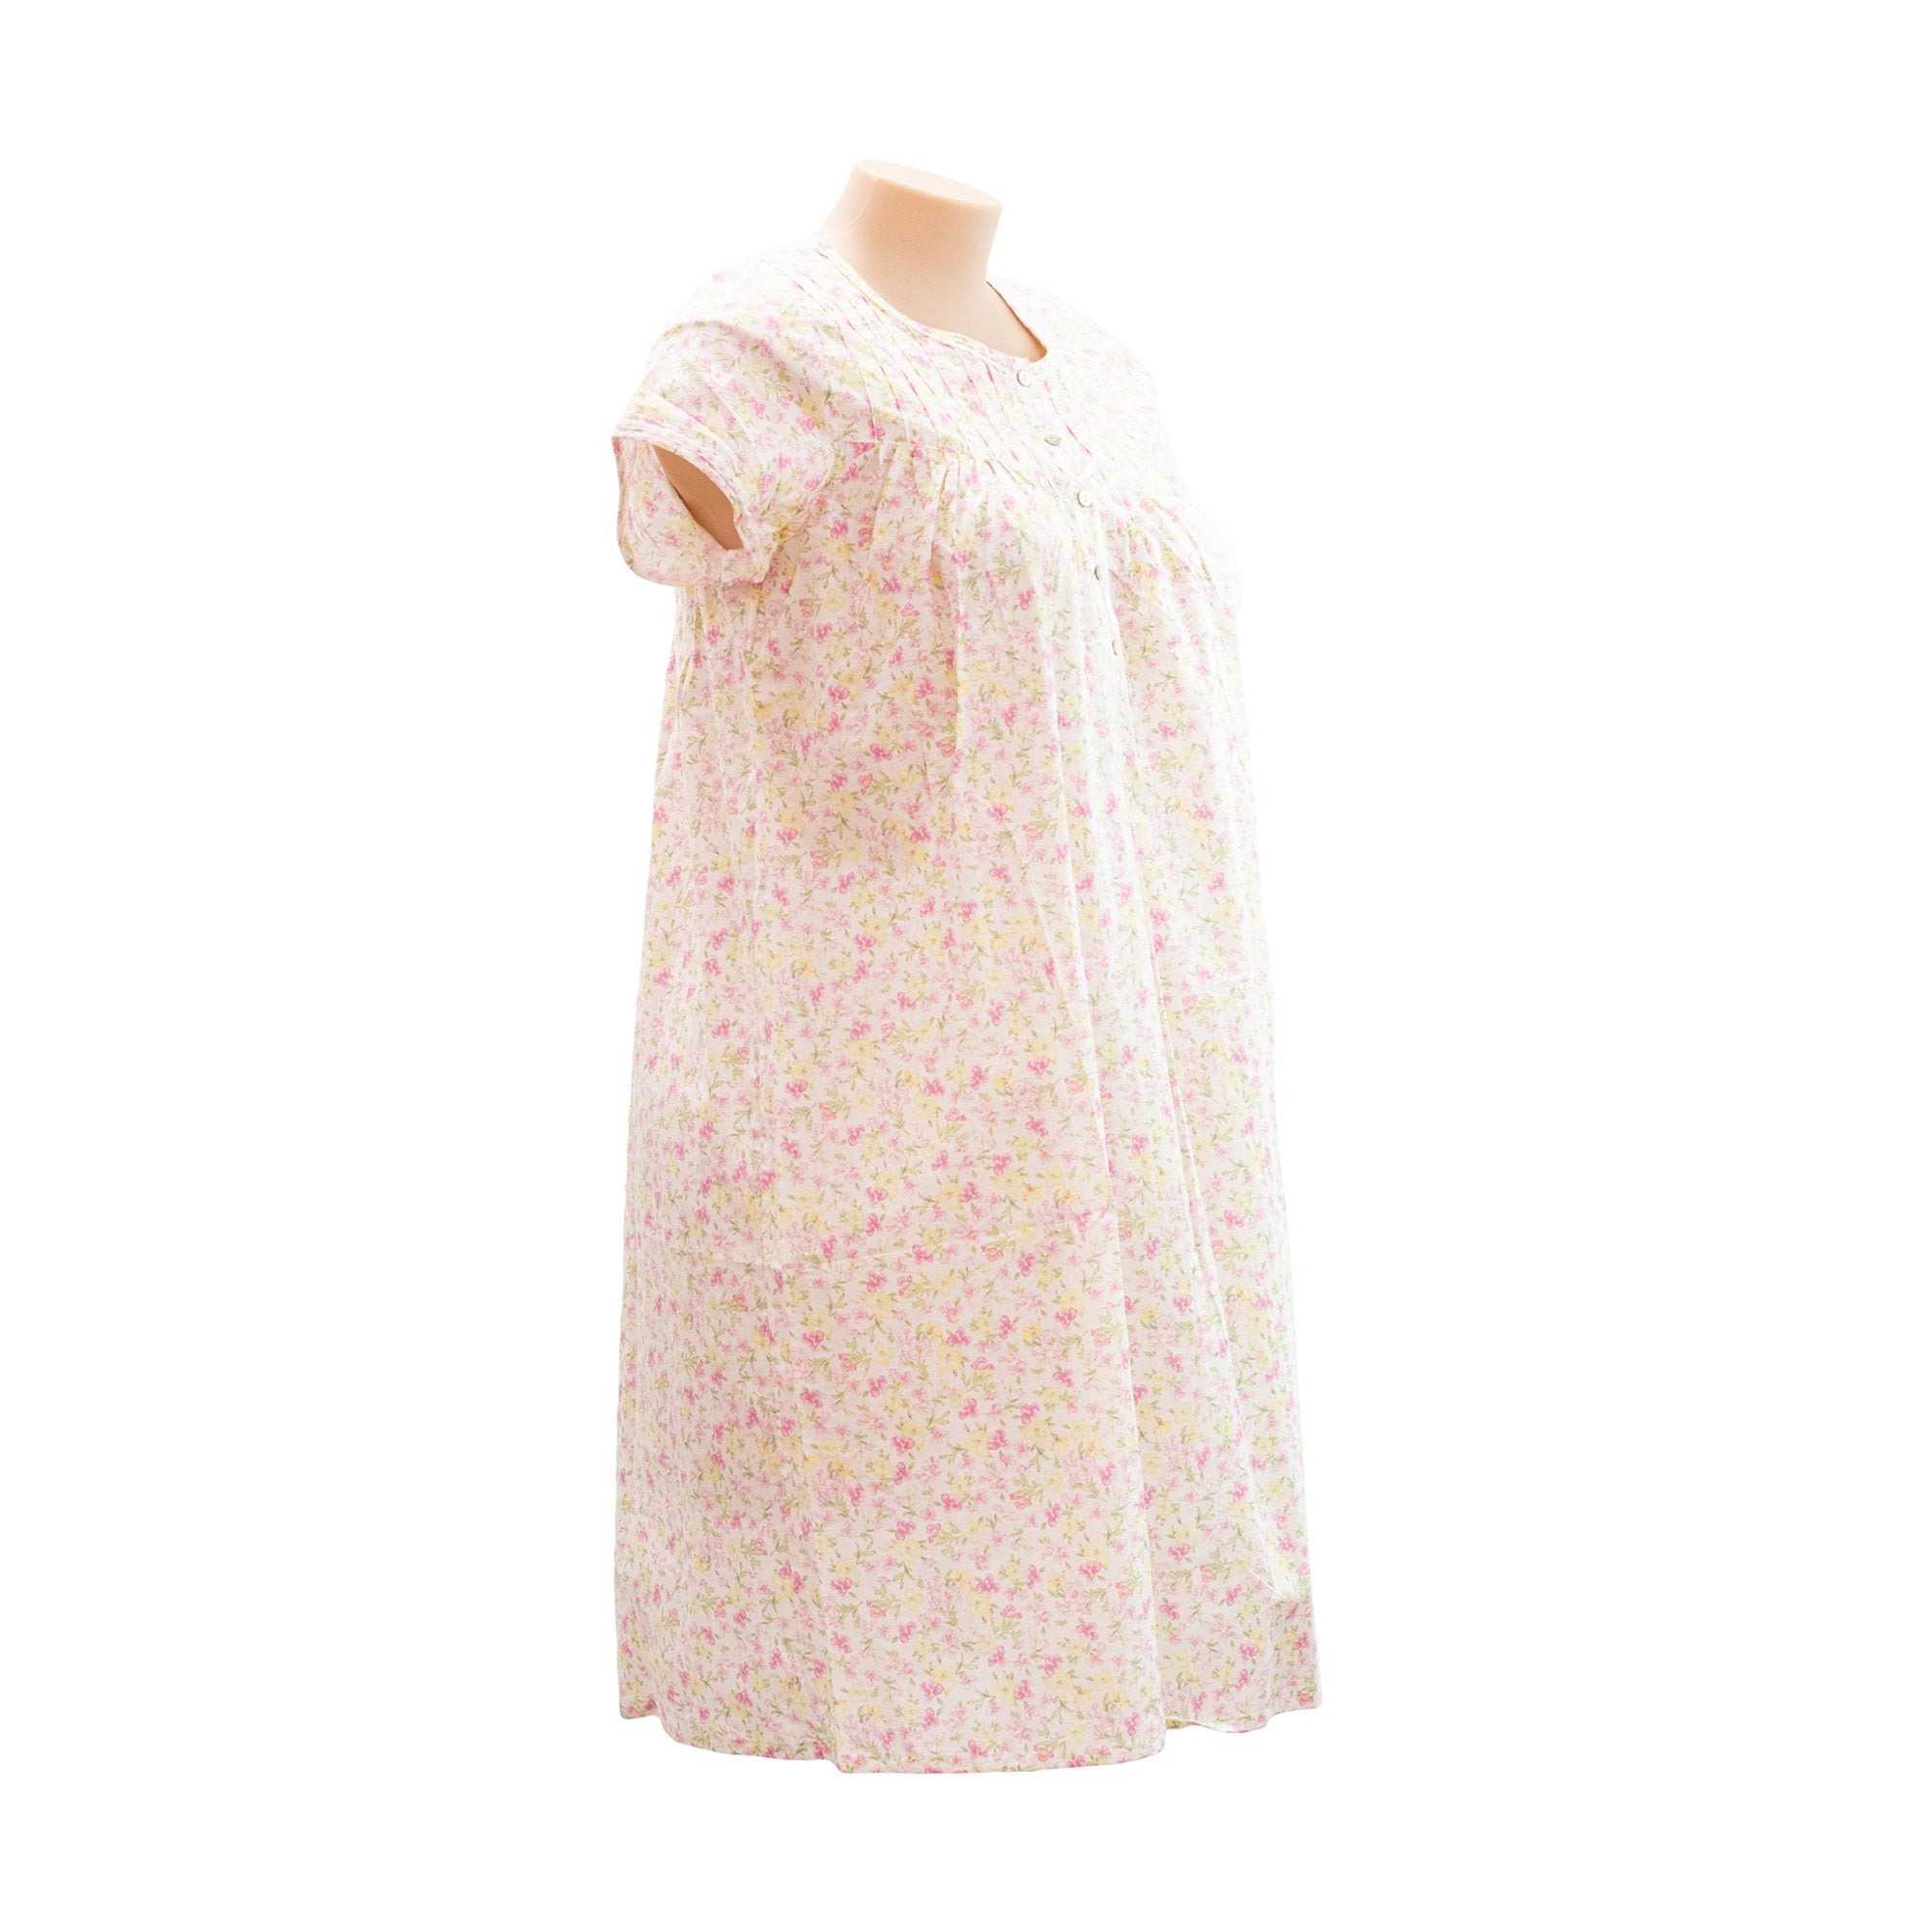 Schrank Cotton Floral Nightie - Nighties  Available at Illusions Lingerie